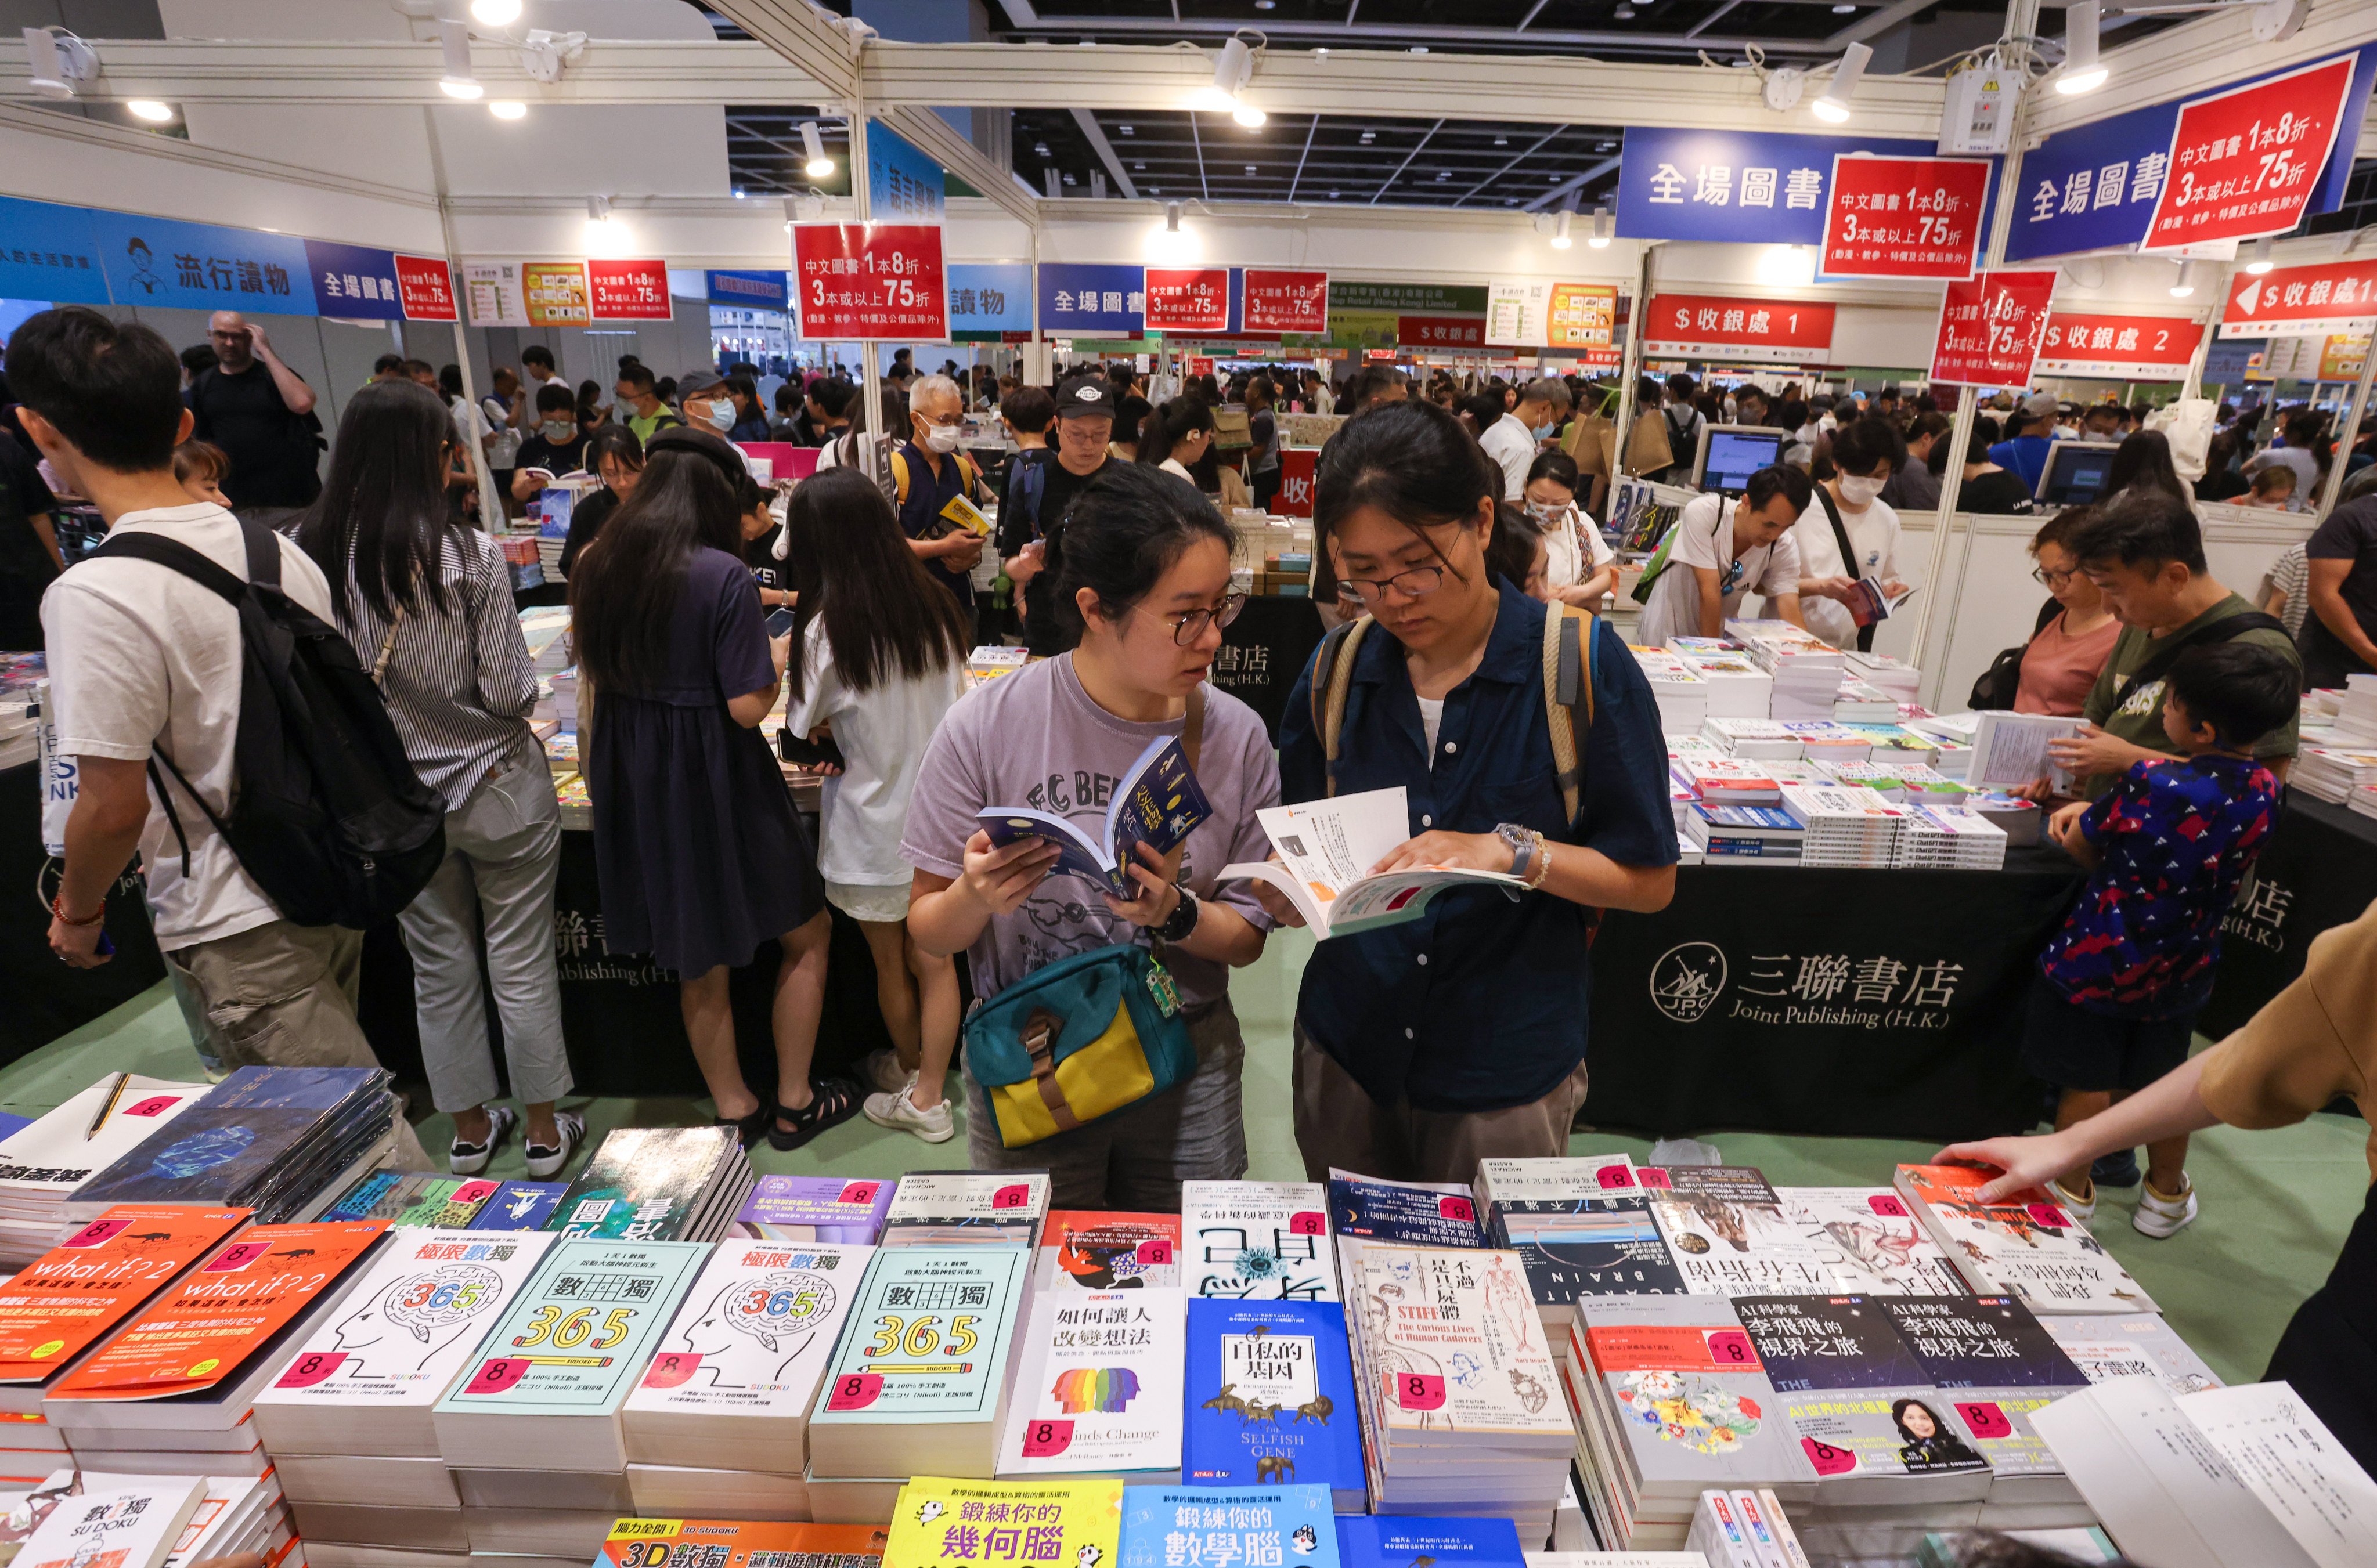 Bookworms flocked to the fair on Tuesday for a final chance to pick up a bargain. Photo: Jonathan Wong